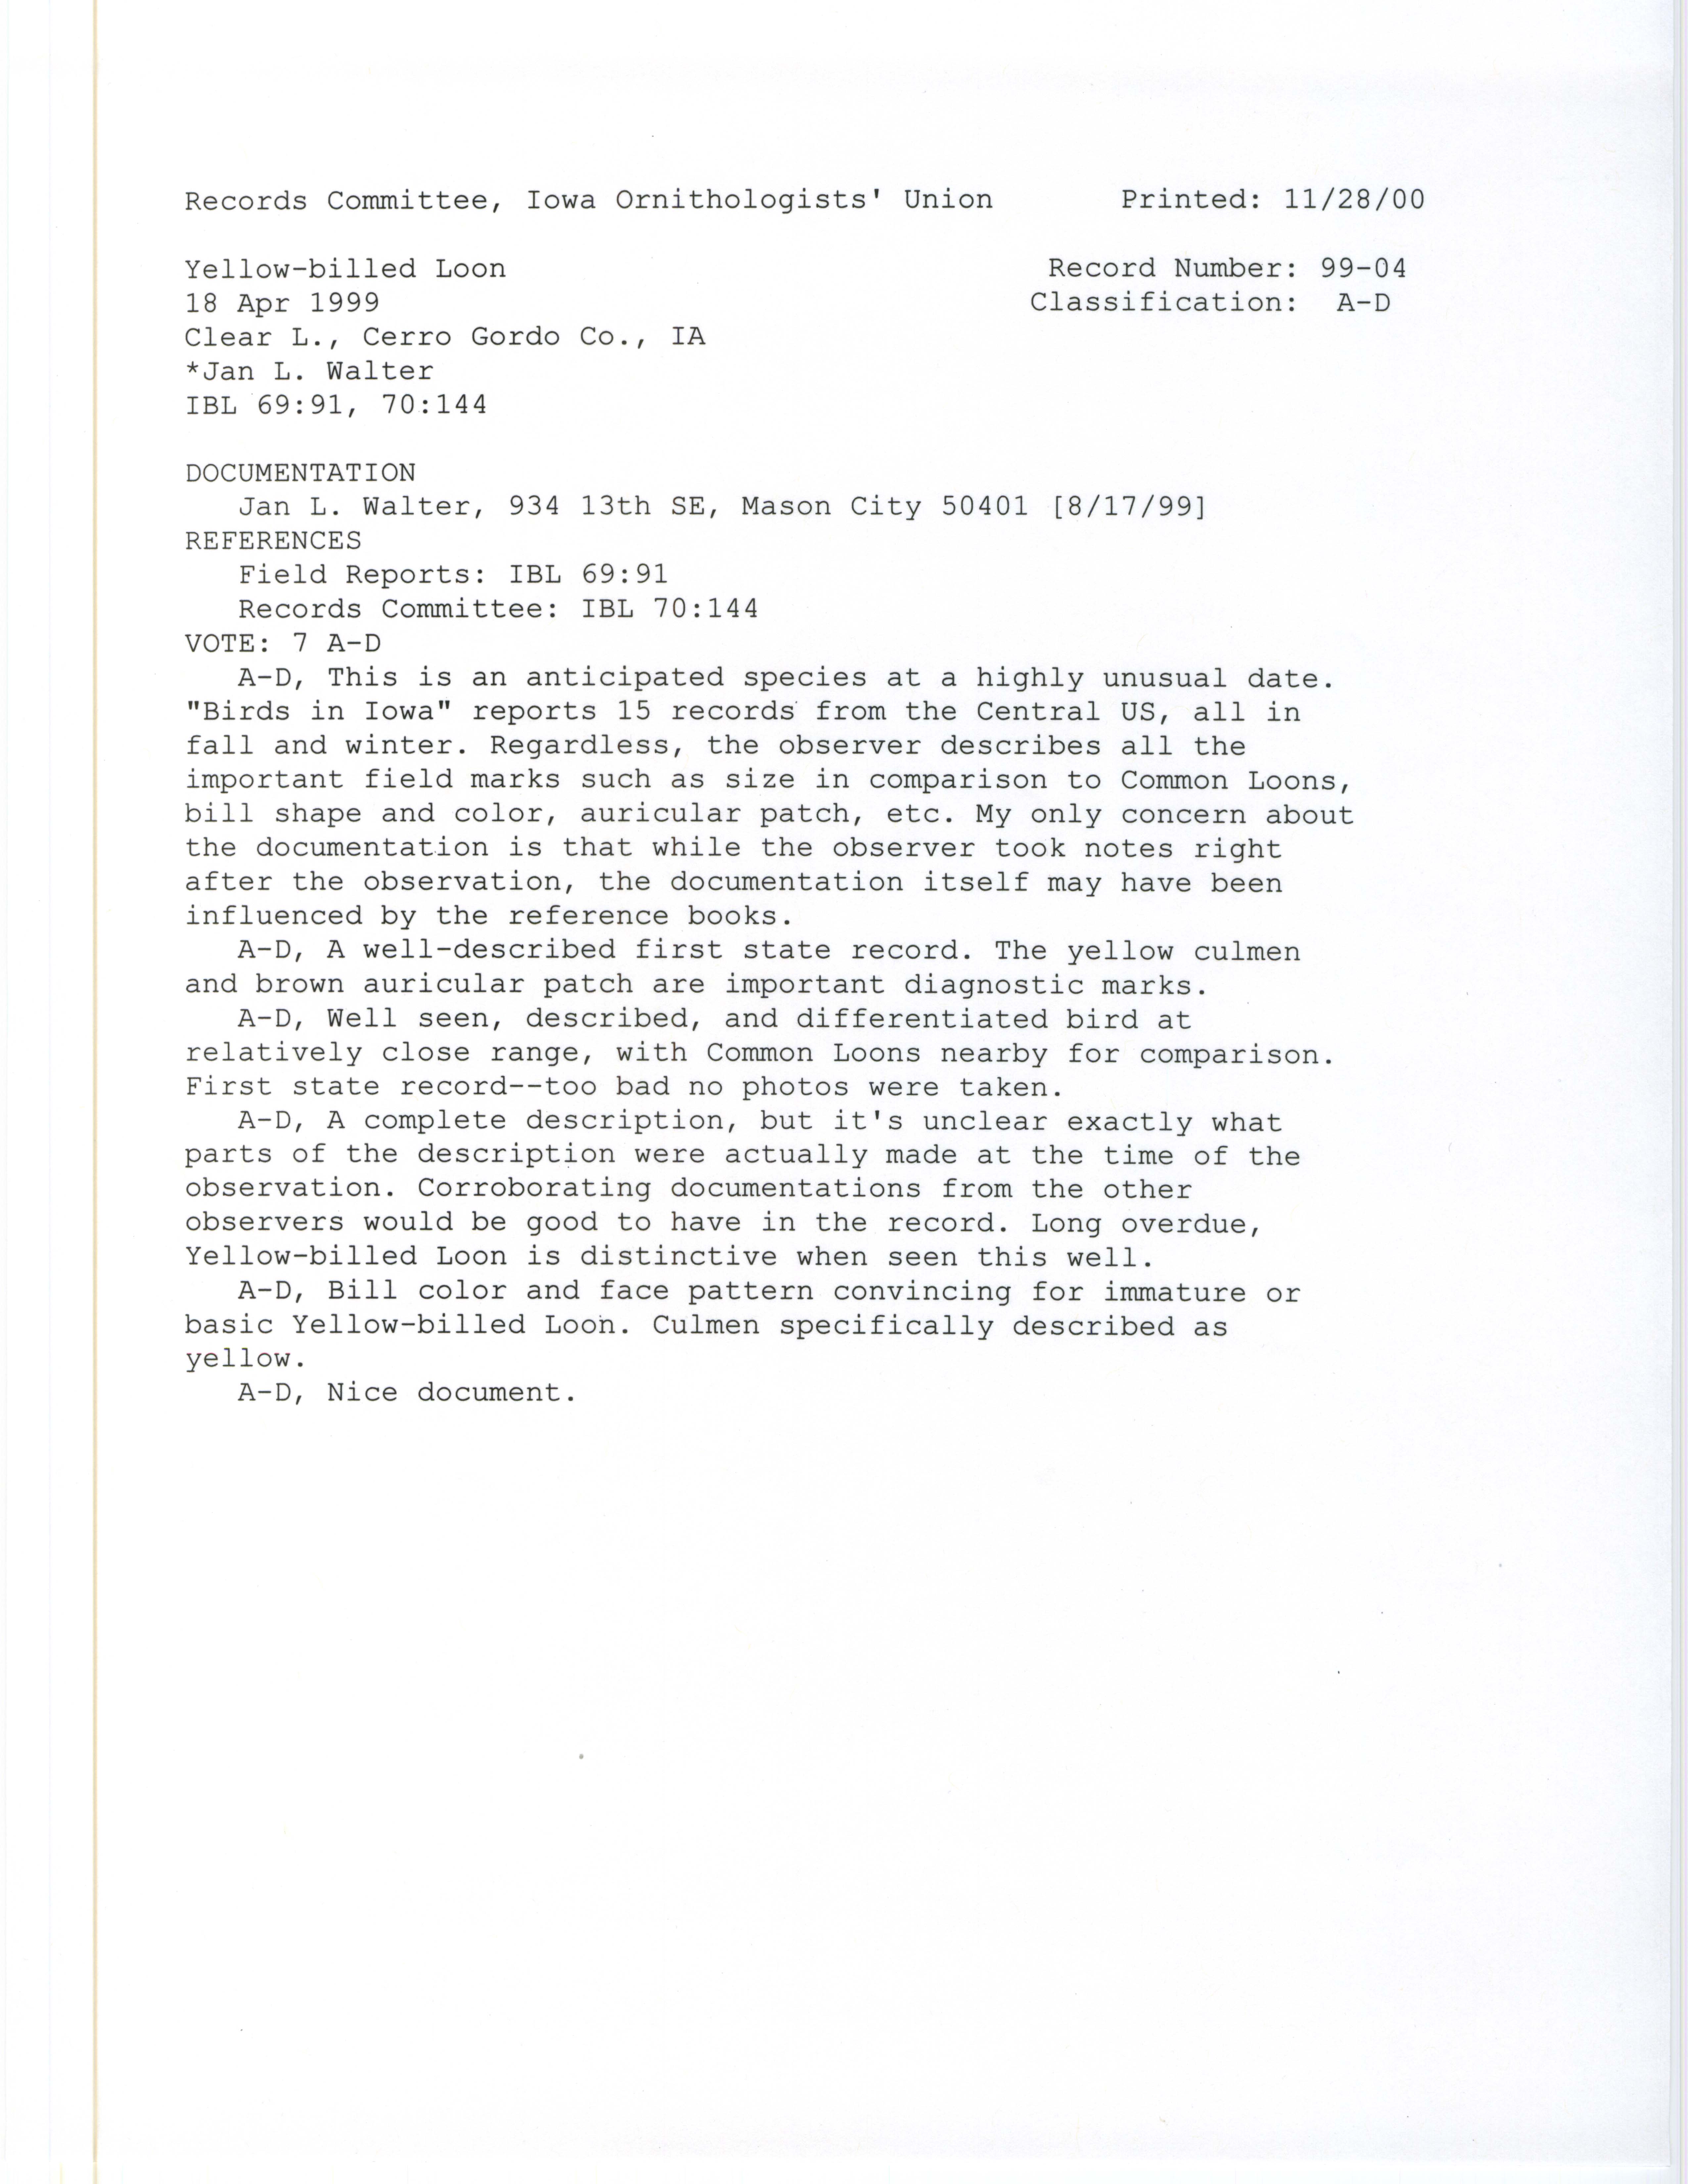 Records Committee review for rare bird sighting of Yellow-billed Loon at Clear Lake, 1999